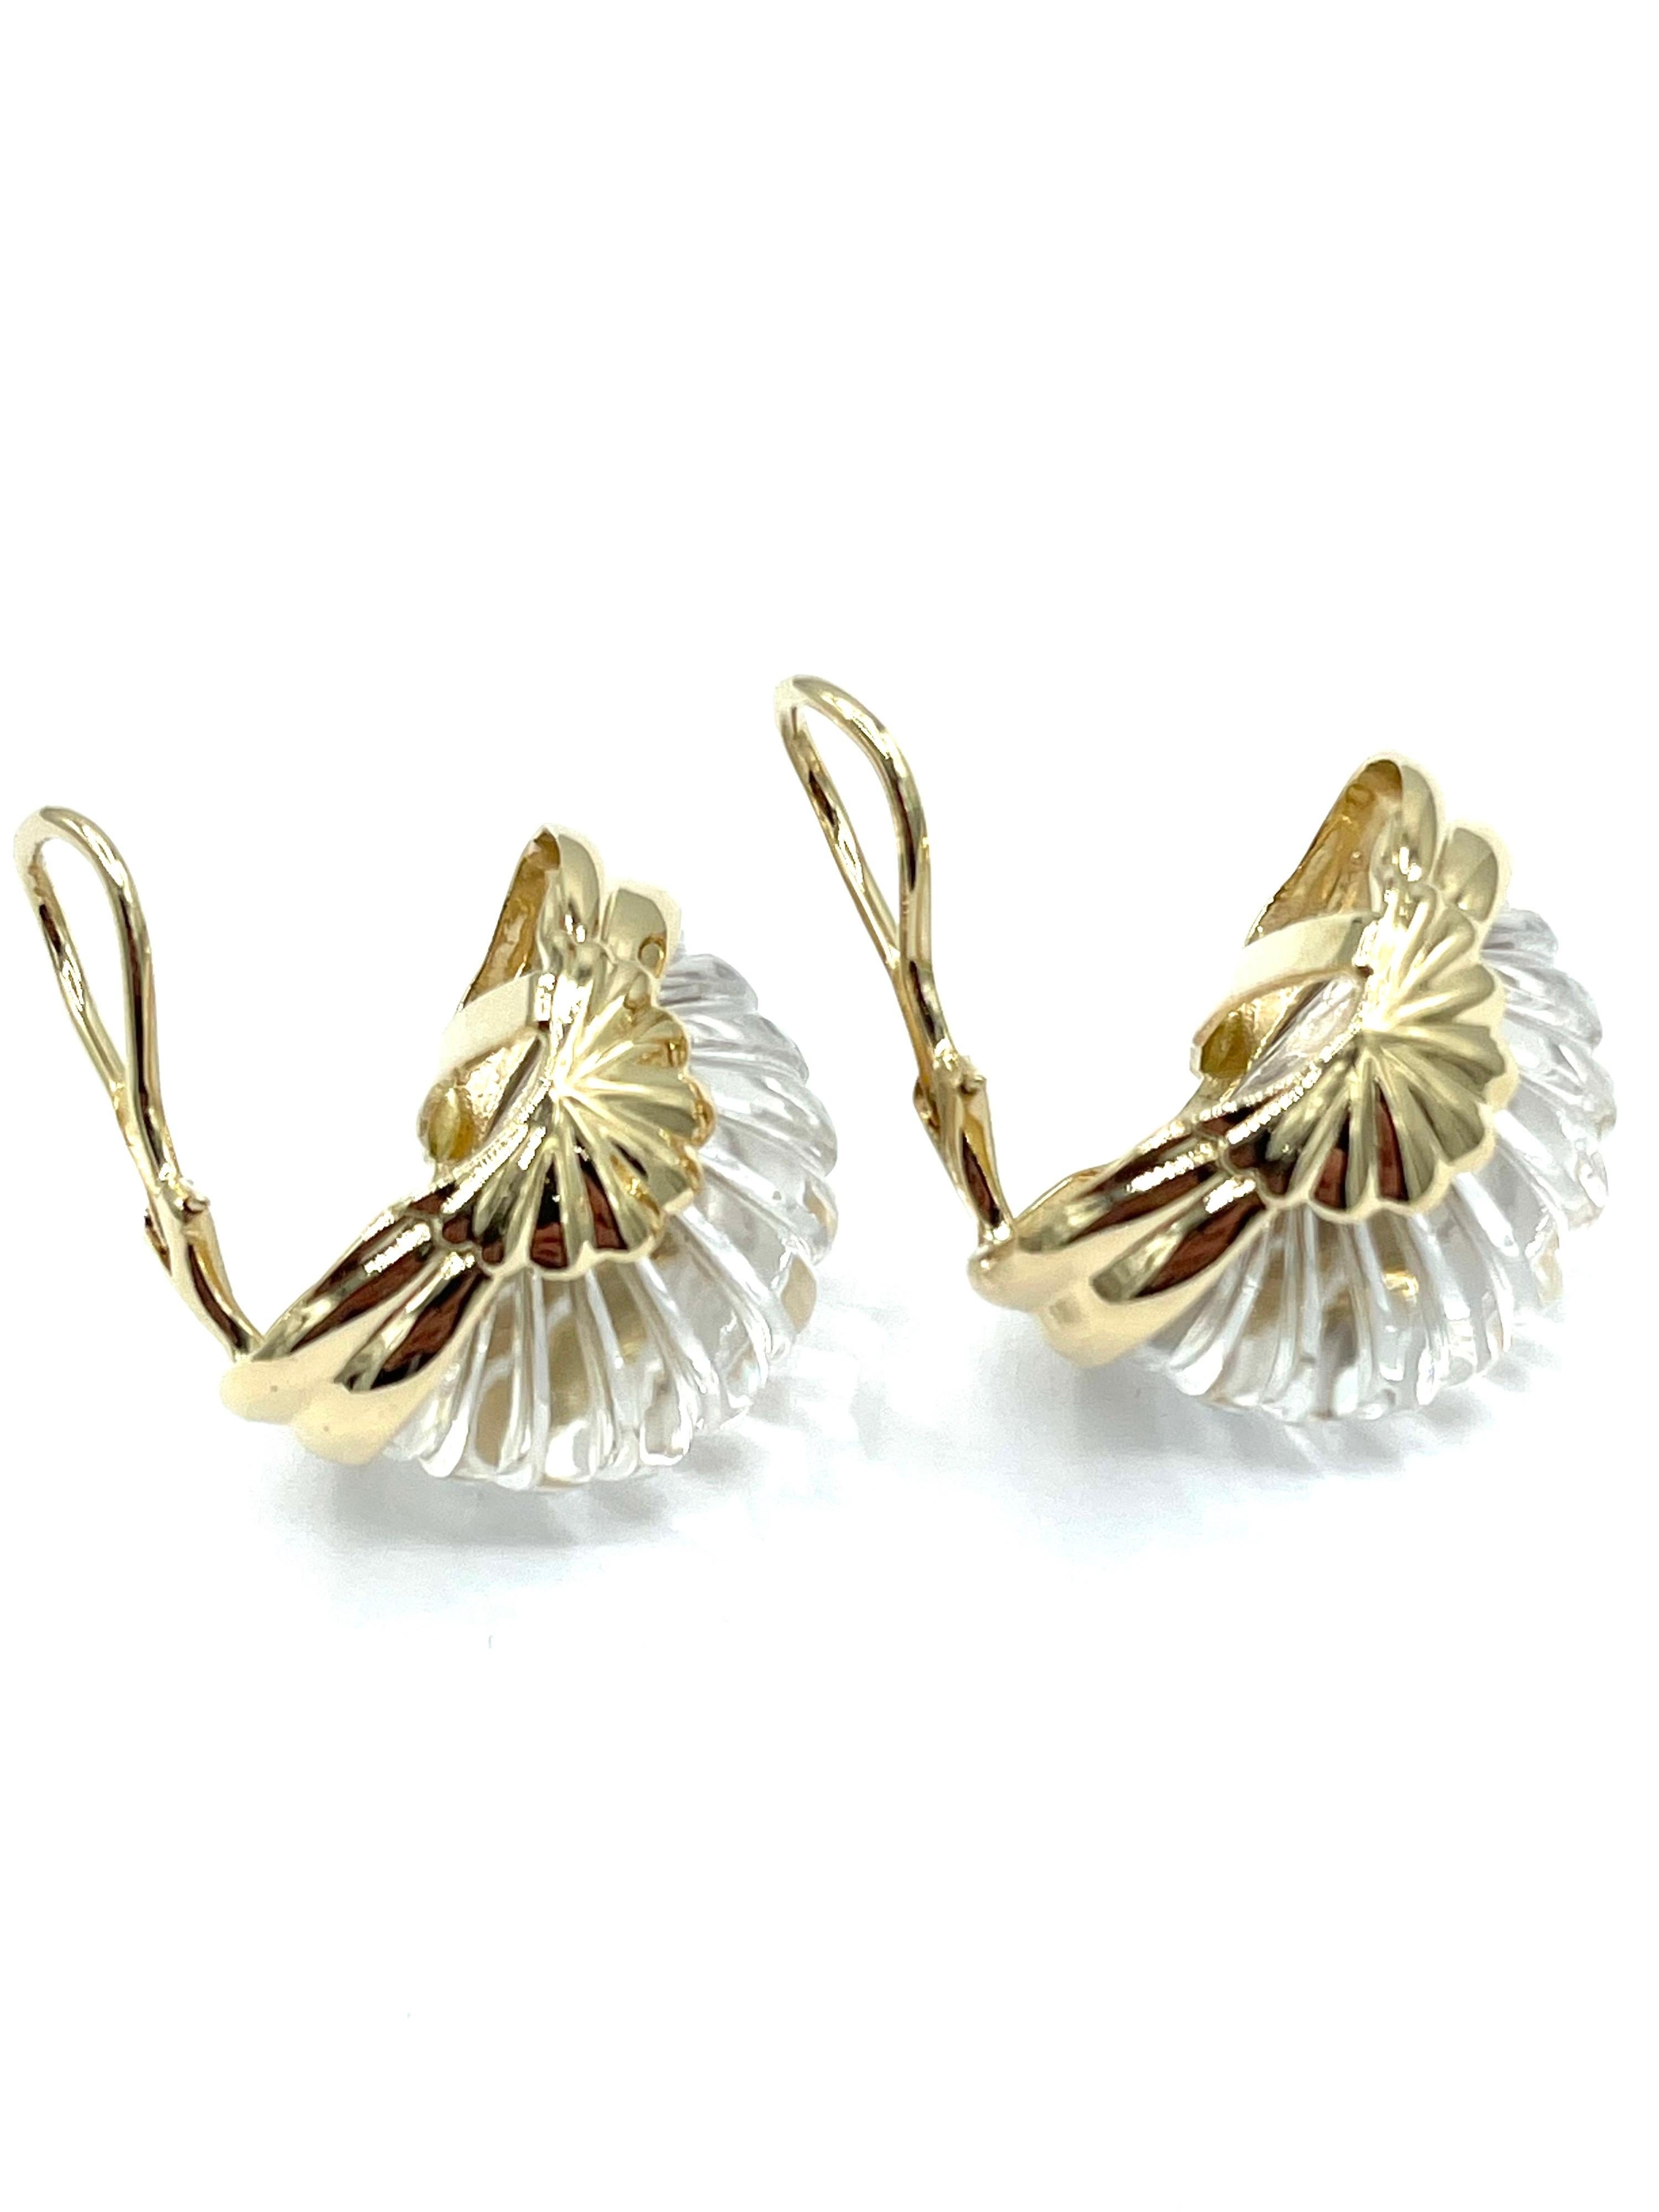 Scalloped Rock Crystal Quartz and 14 Karat Yellow Gold Clip Earrings In Excellent Condition For Sale In Chevy Chase, MD